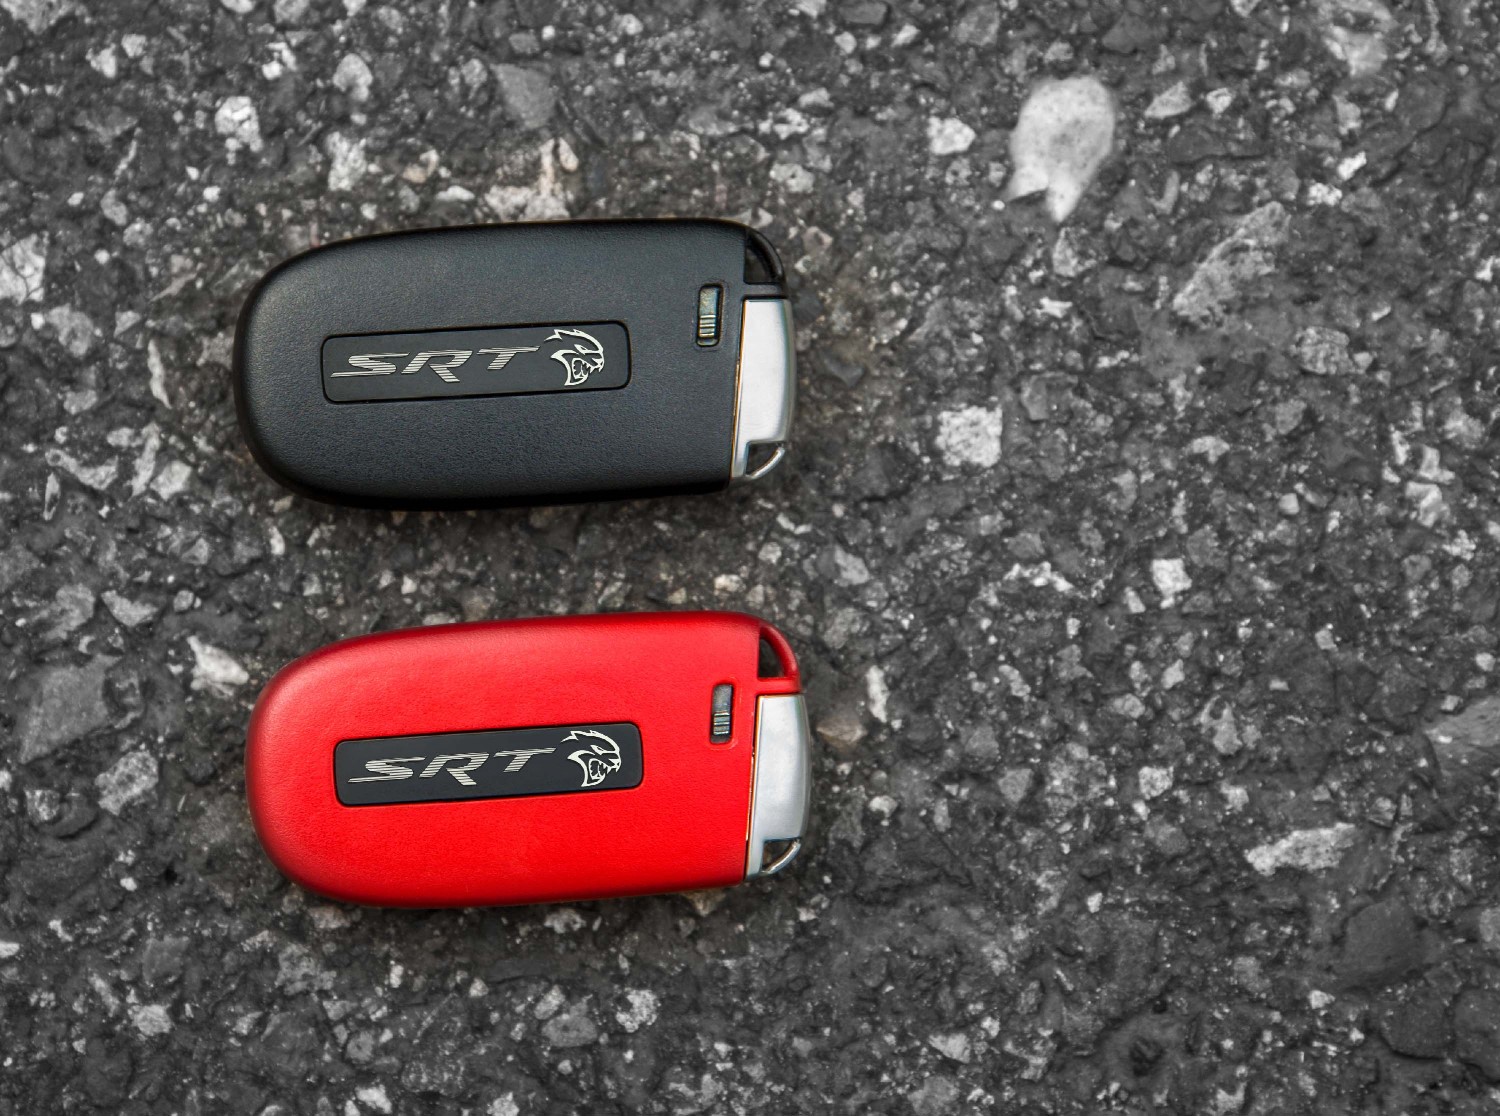 The car comes with two keys. The black key is the go-fast key.  The red key is the 'go really fast' key